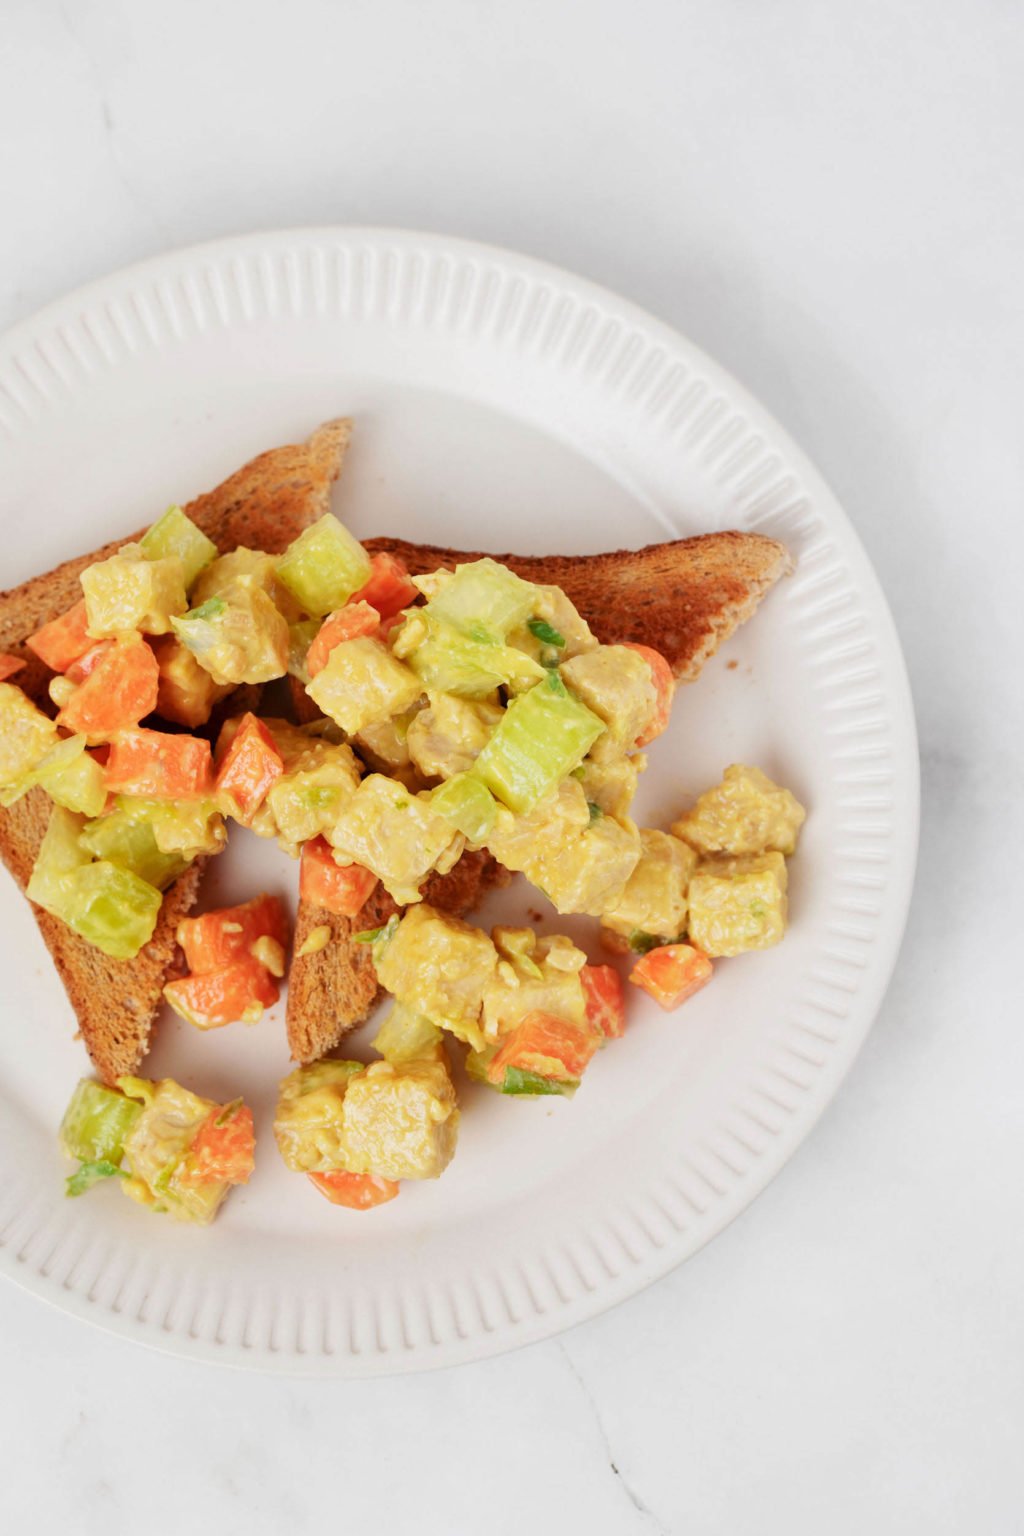 A plant-based tempeh lunch salad has been served over slices of toast, which rest on a white, round plate.